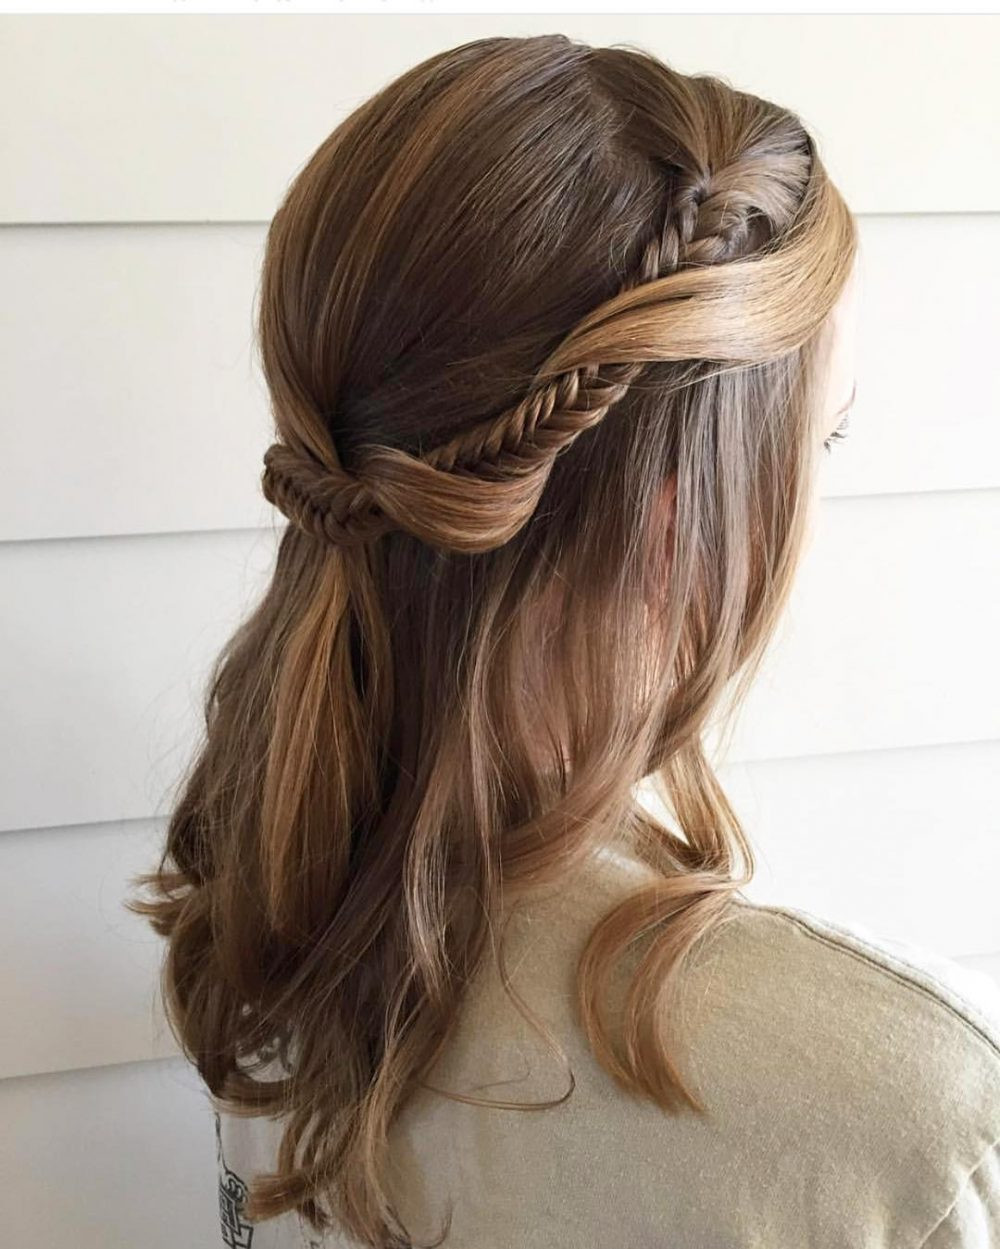 Simple Updo Hairstyles
 33 Ridiculously Easy DIY Chic Updos